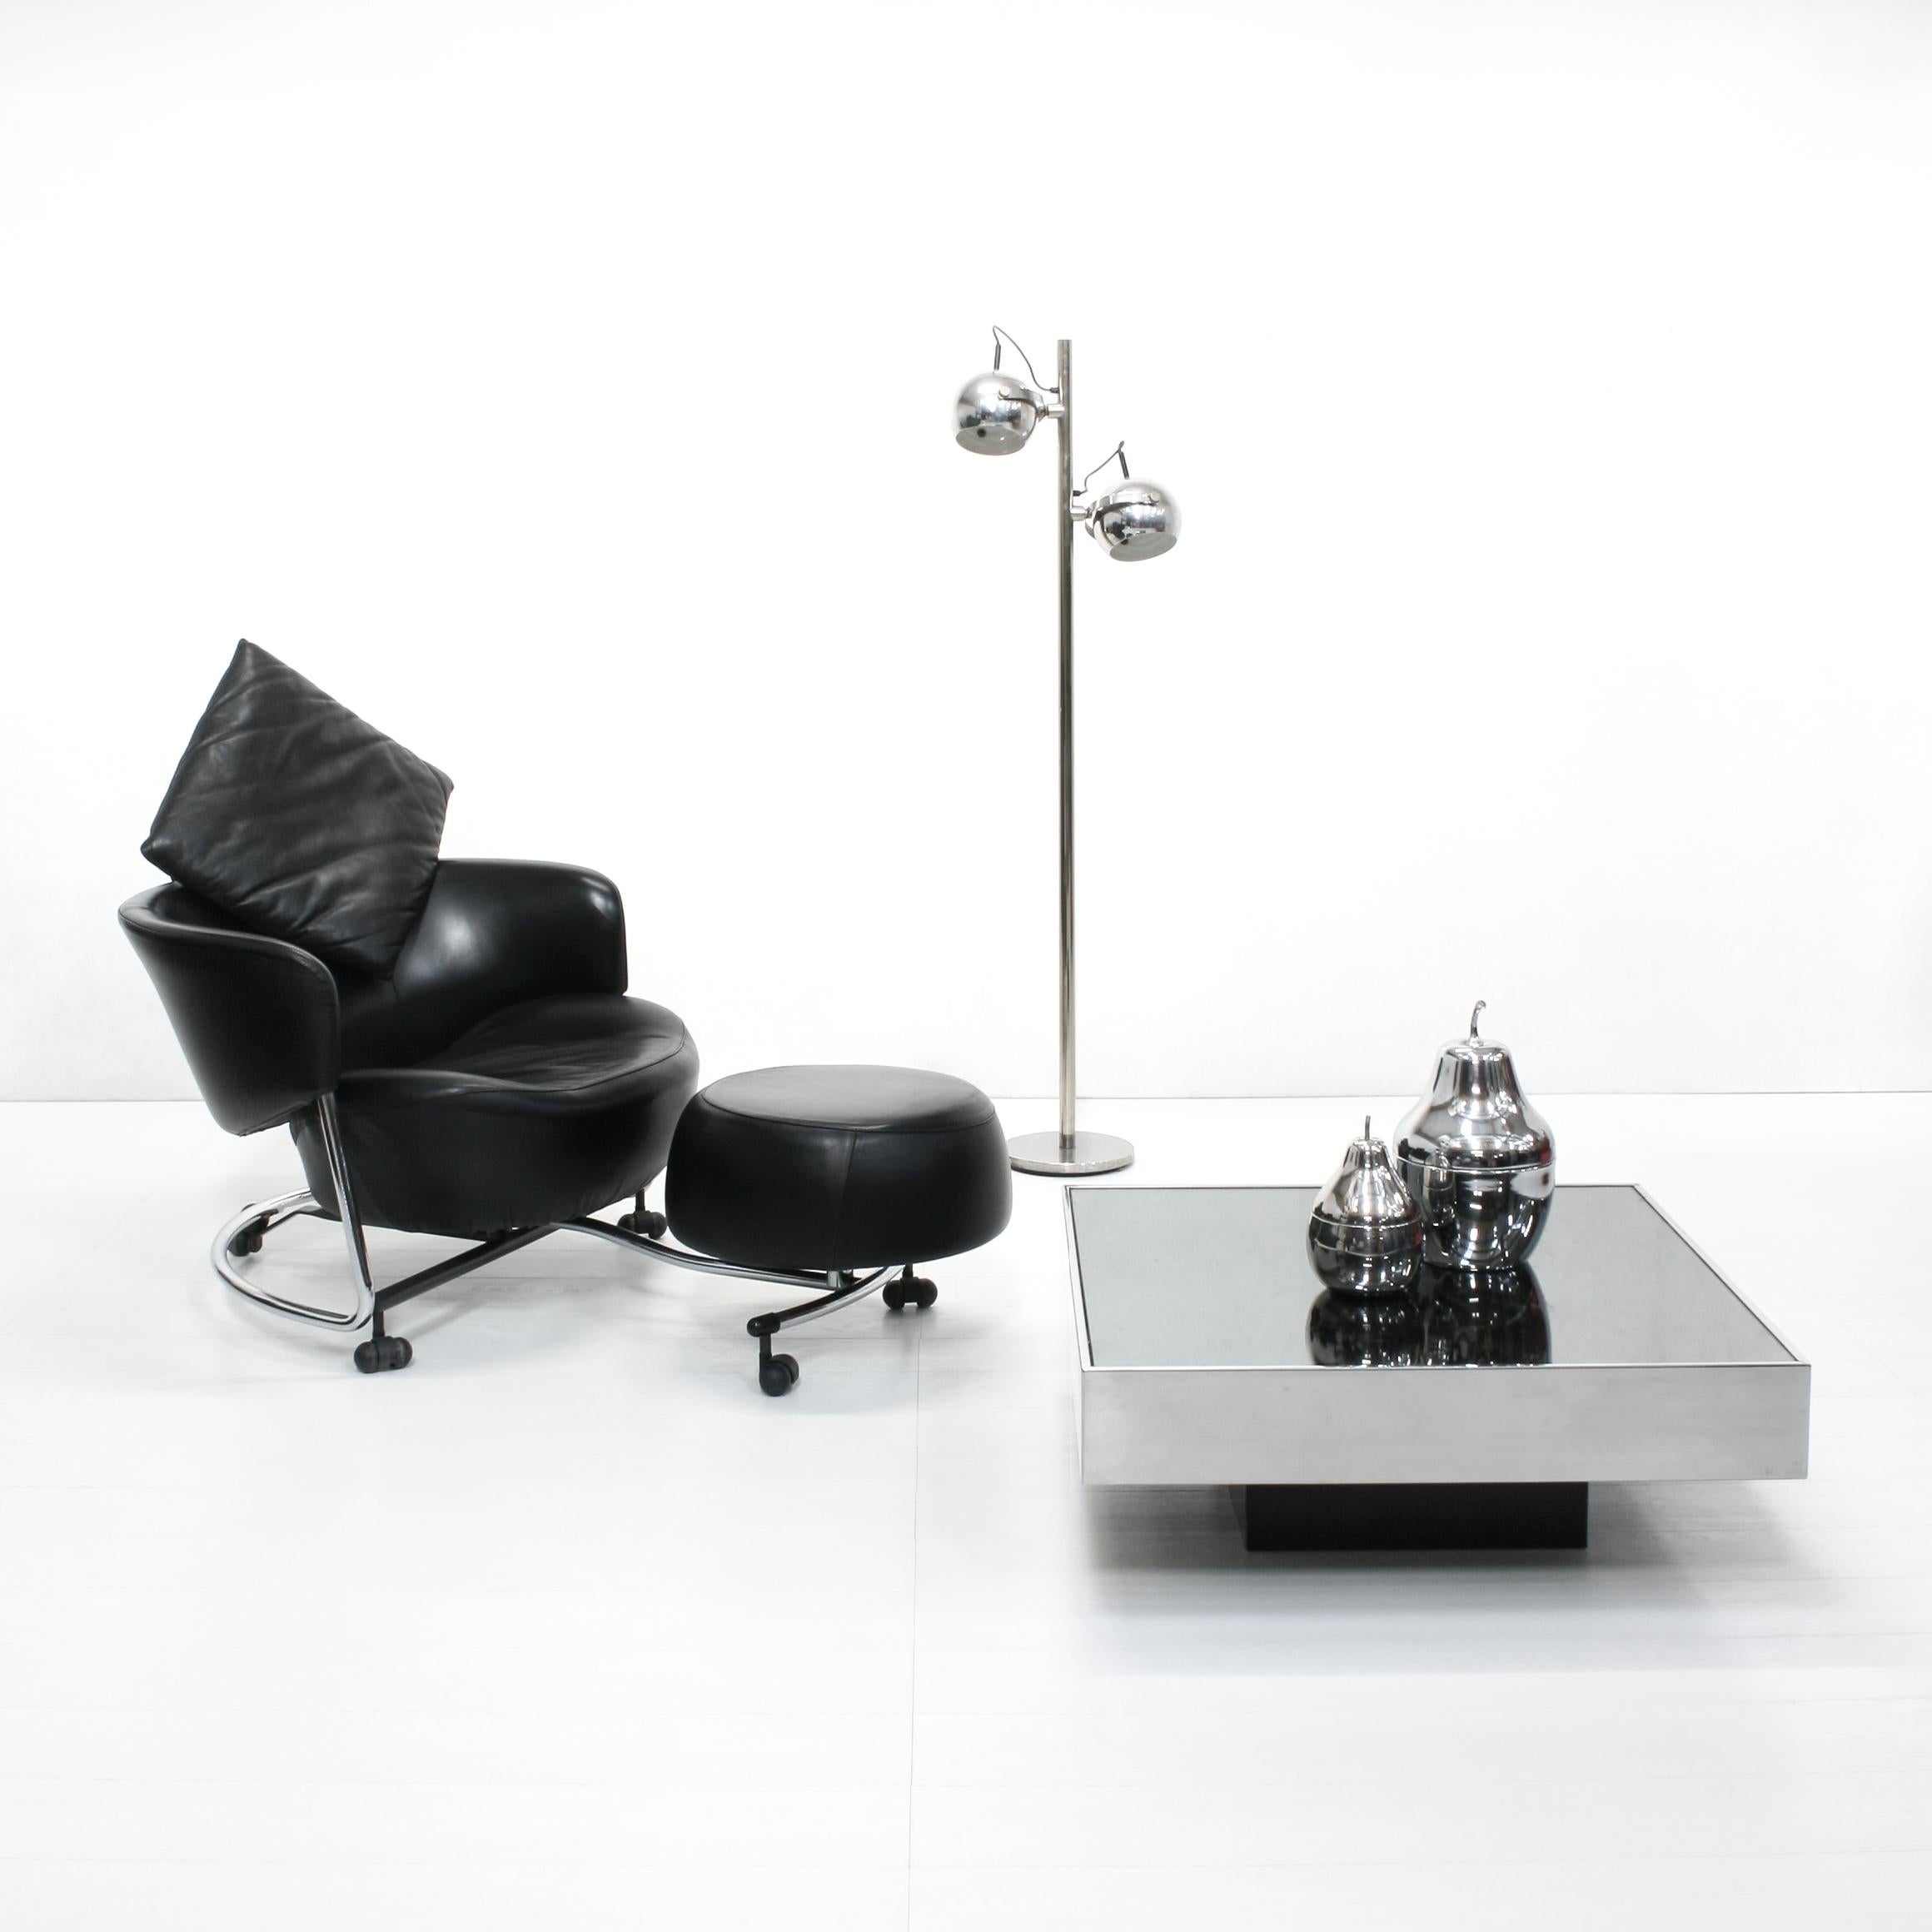 Postmodern armchair in black leather on a chrome frame with independently movable seat, headrest cushion and satellite ottoman. The backrest has tilting adjustment.